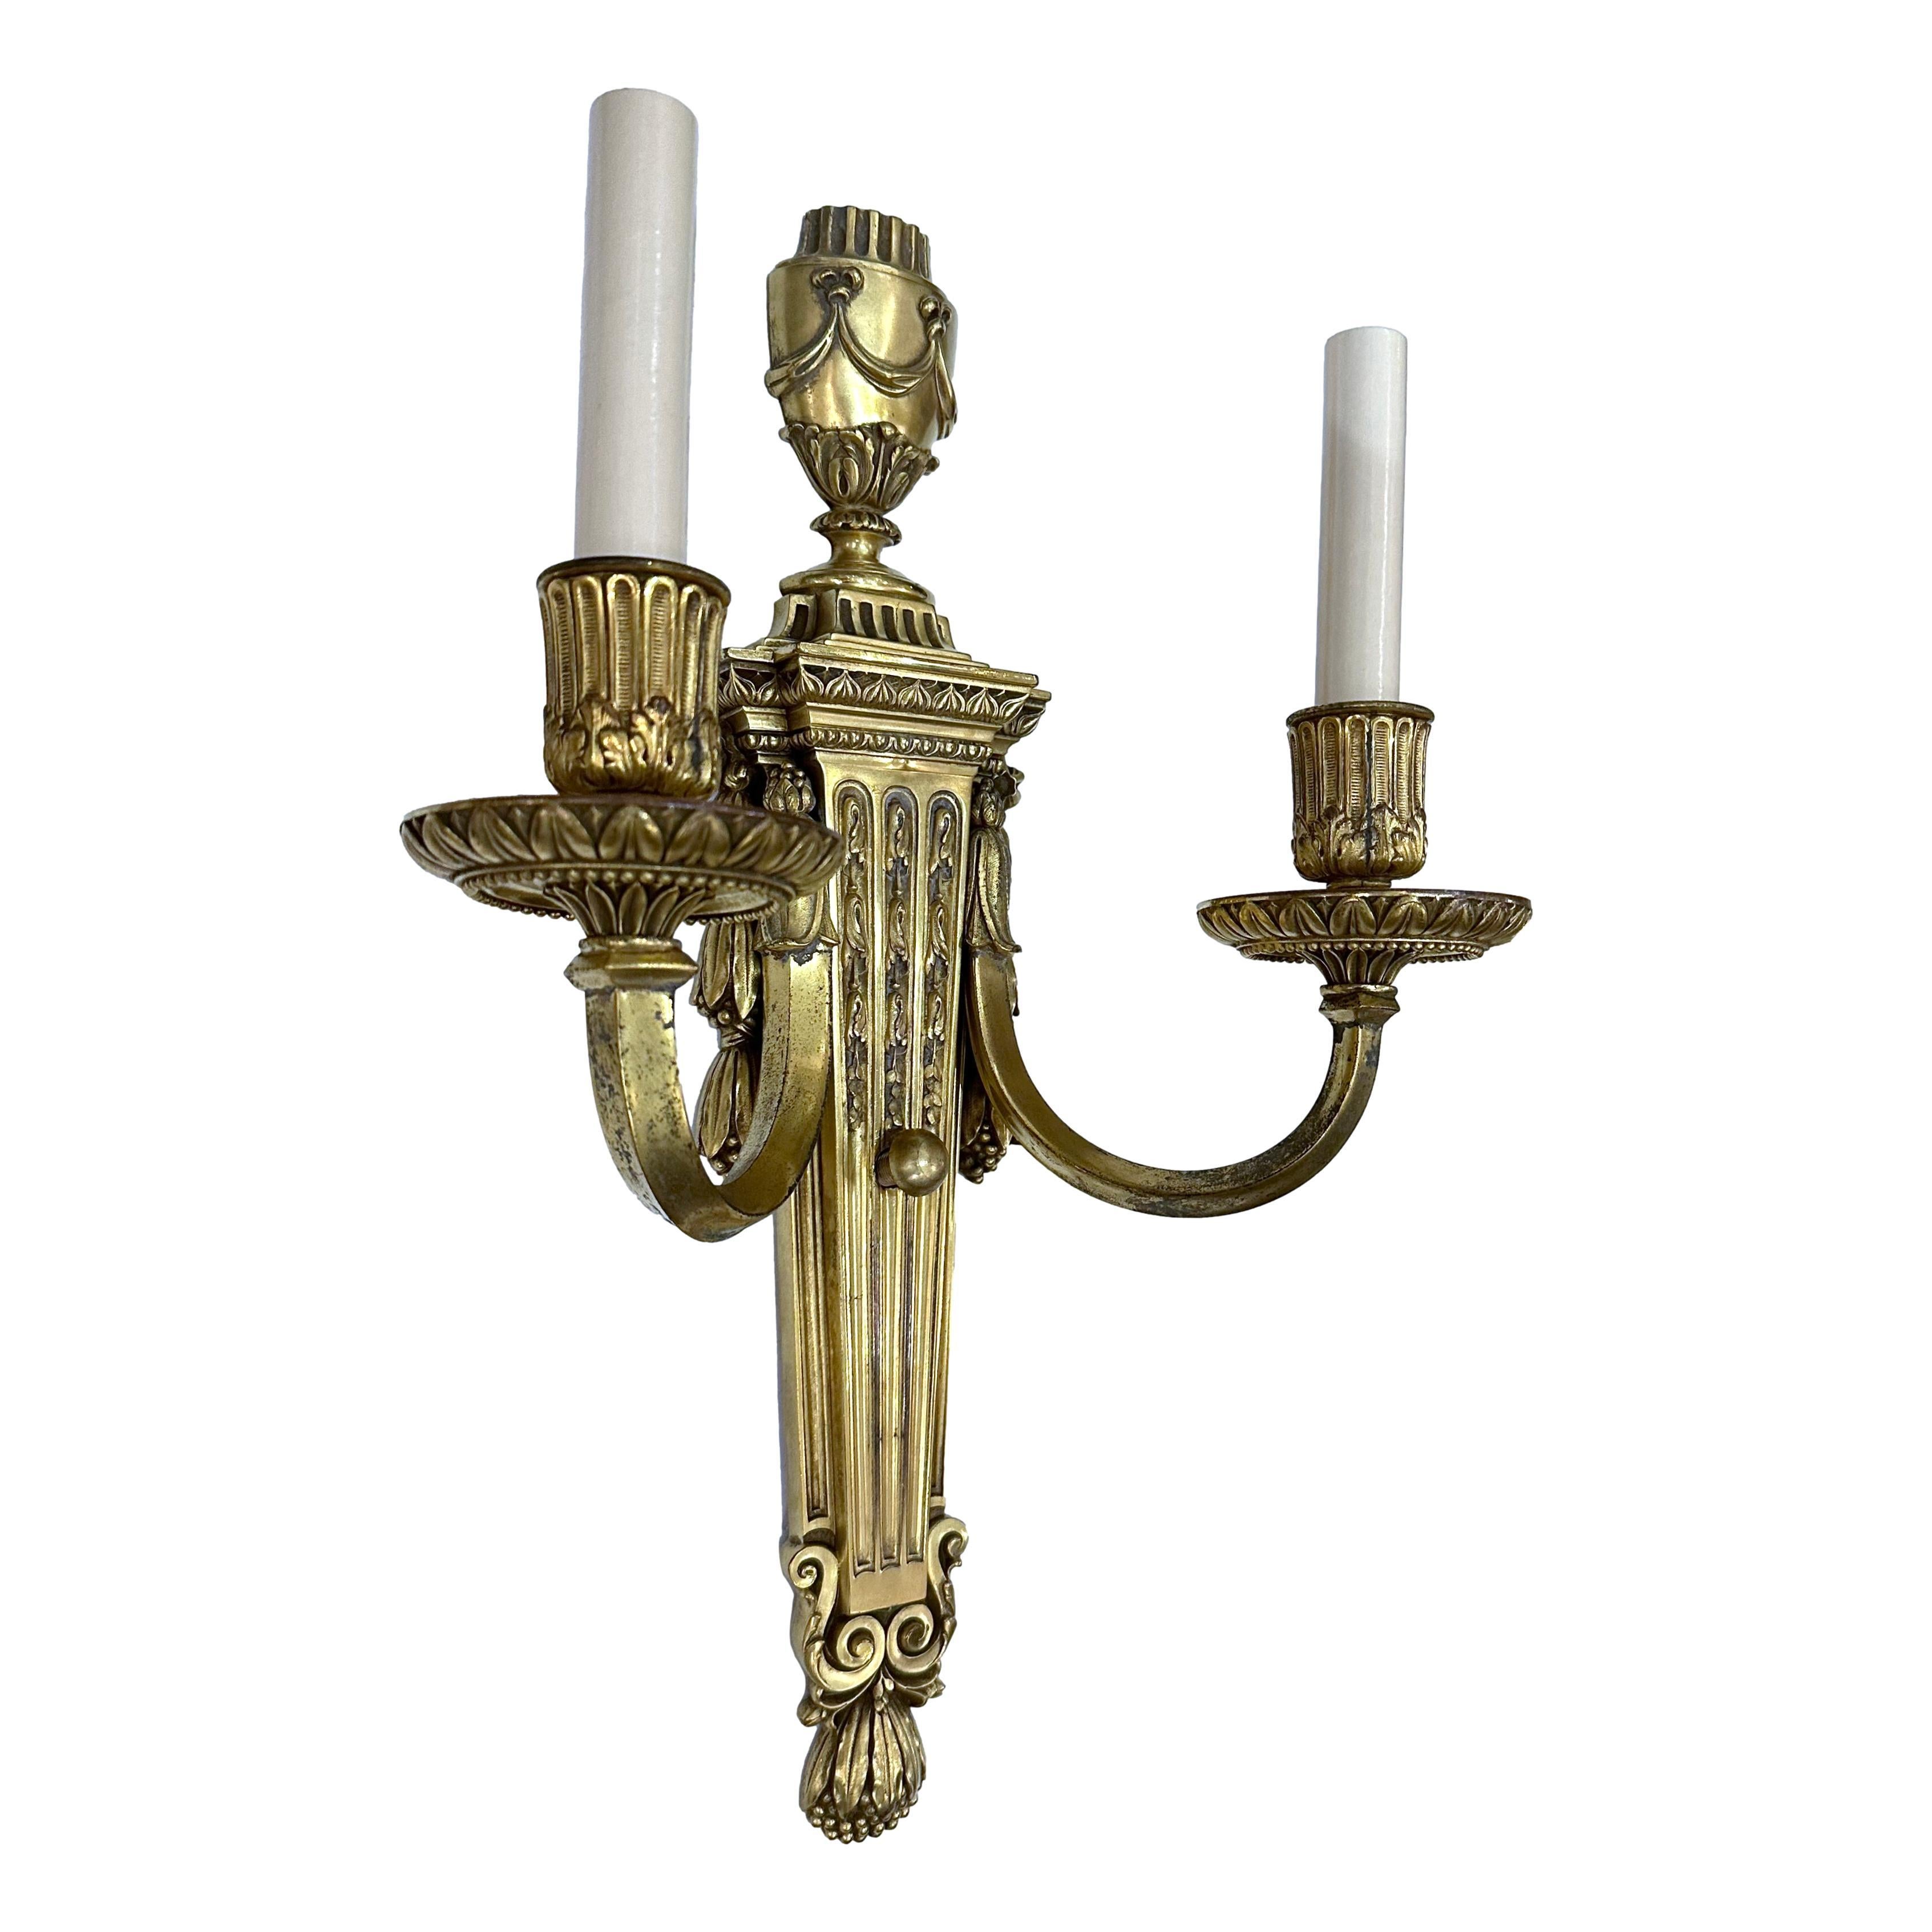 Pair of circa 1920's American gilt neoclassic style sconces by Caldwell.

Measurements:
Height: 18.25